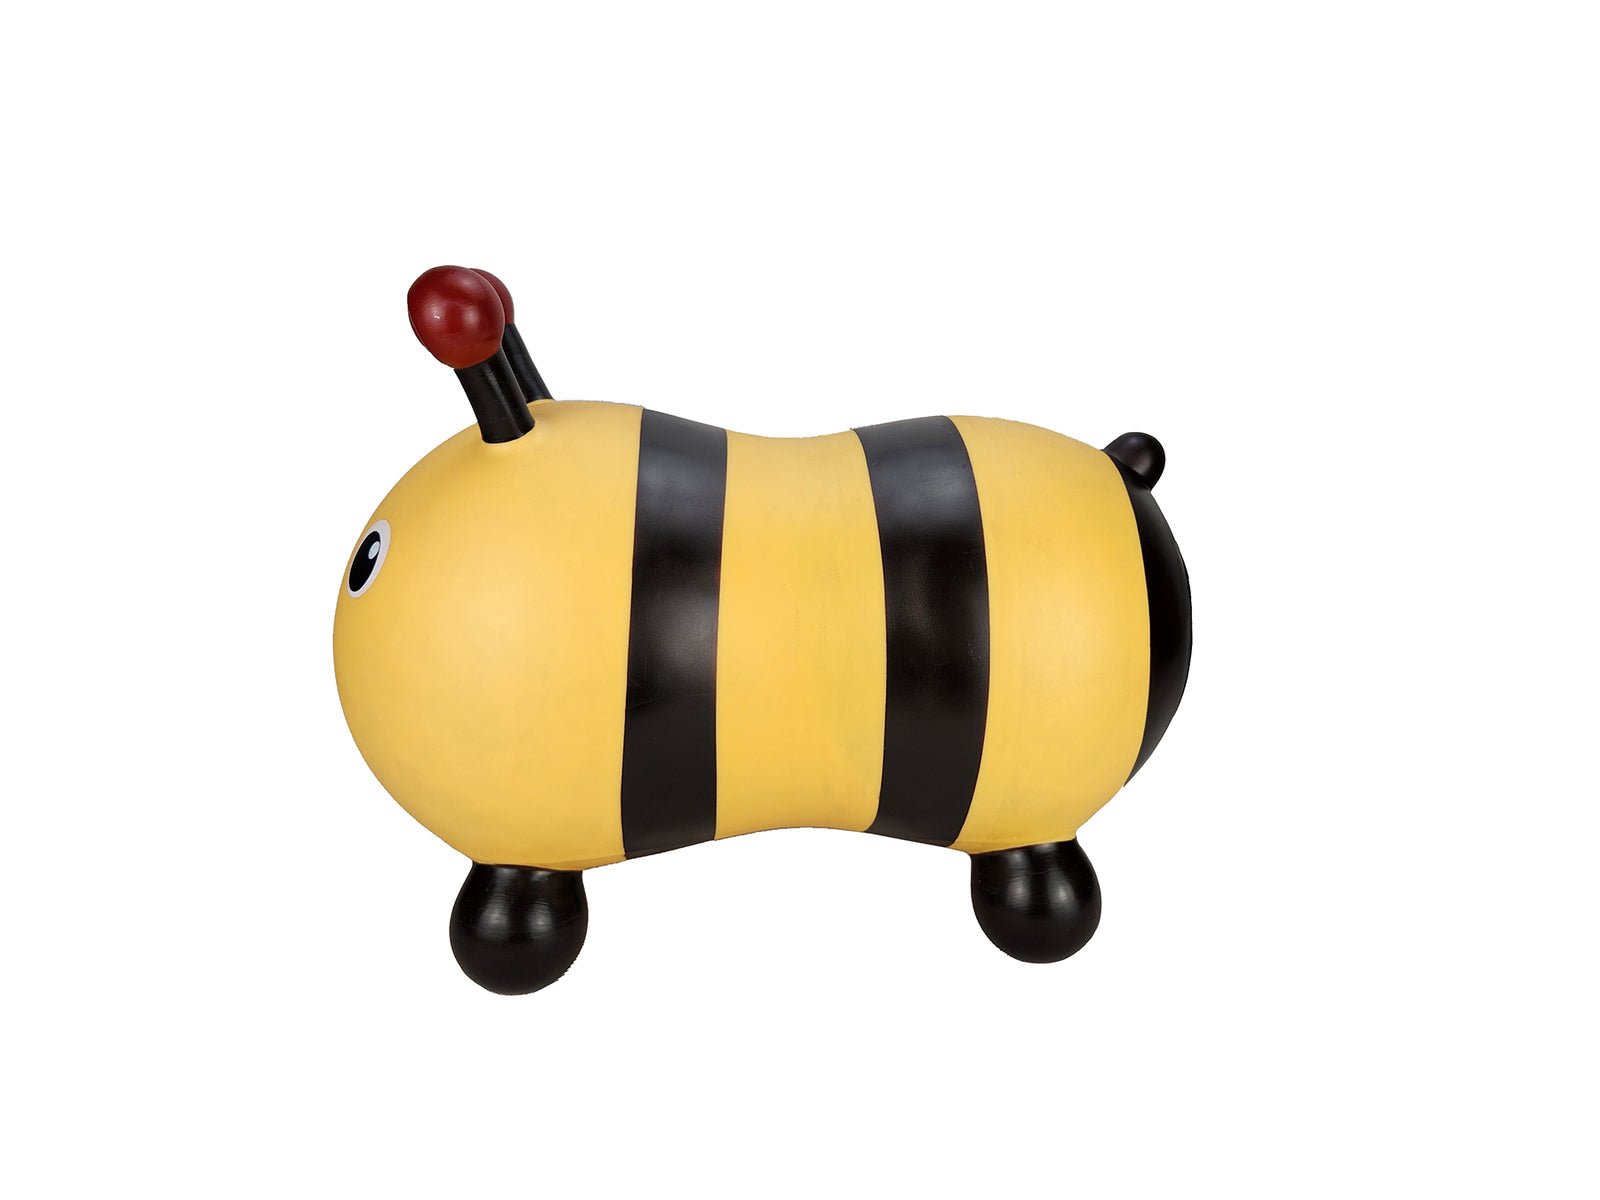 Kids Mega Mart's Buzzy The Bee Ride-On Toy